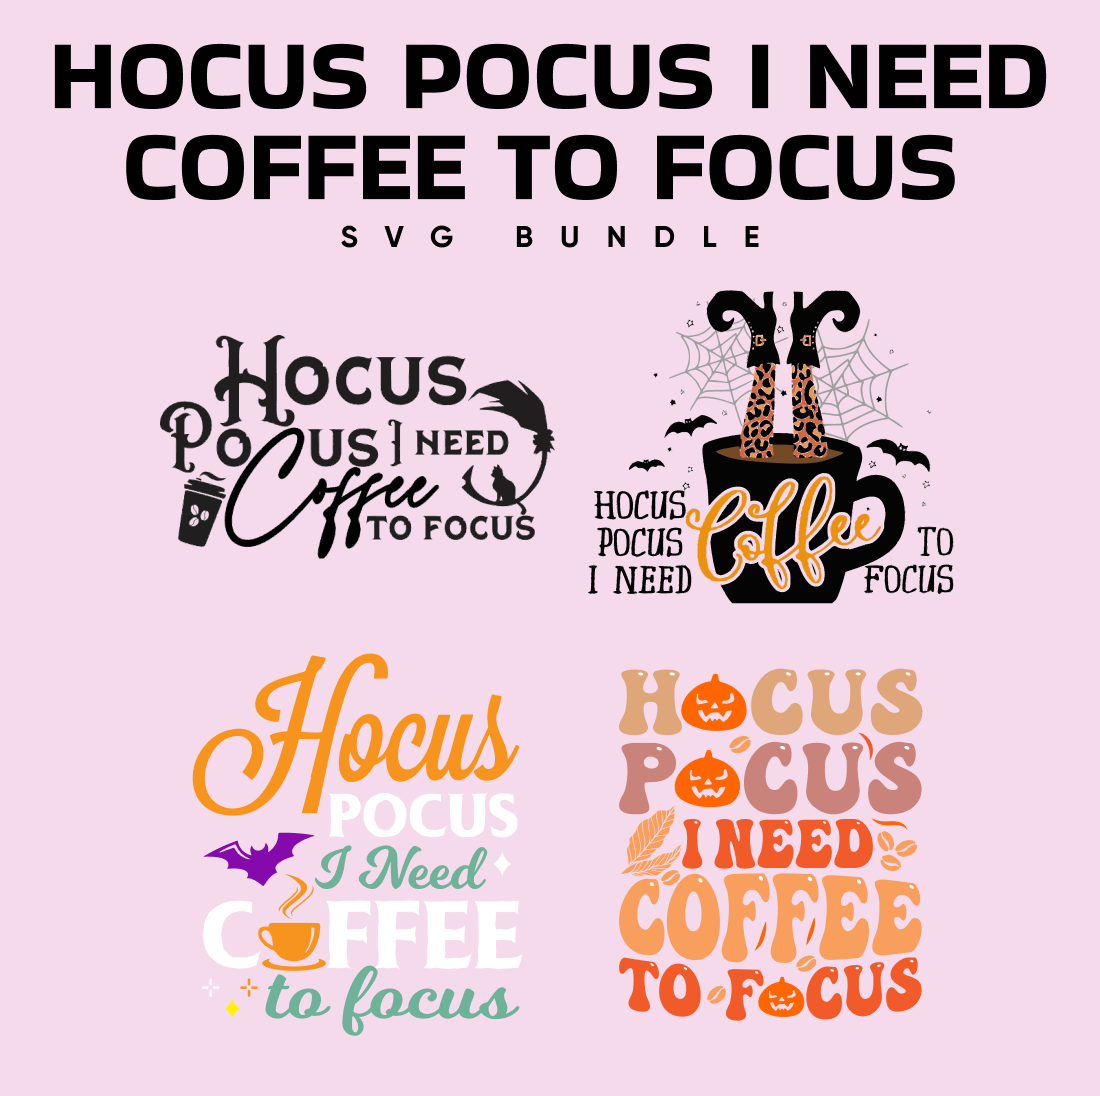 Images with hocus pocus i need coffee to focus svg.